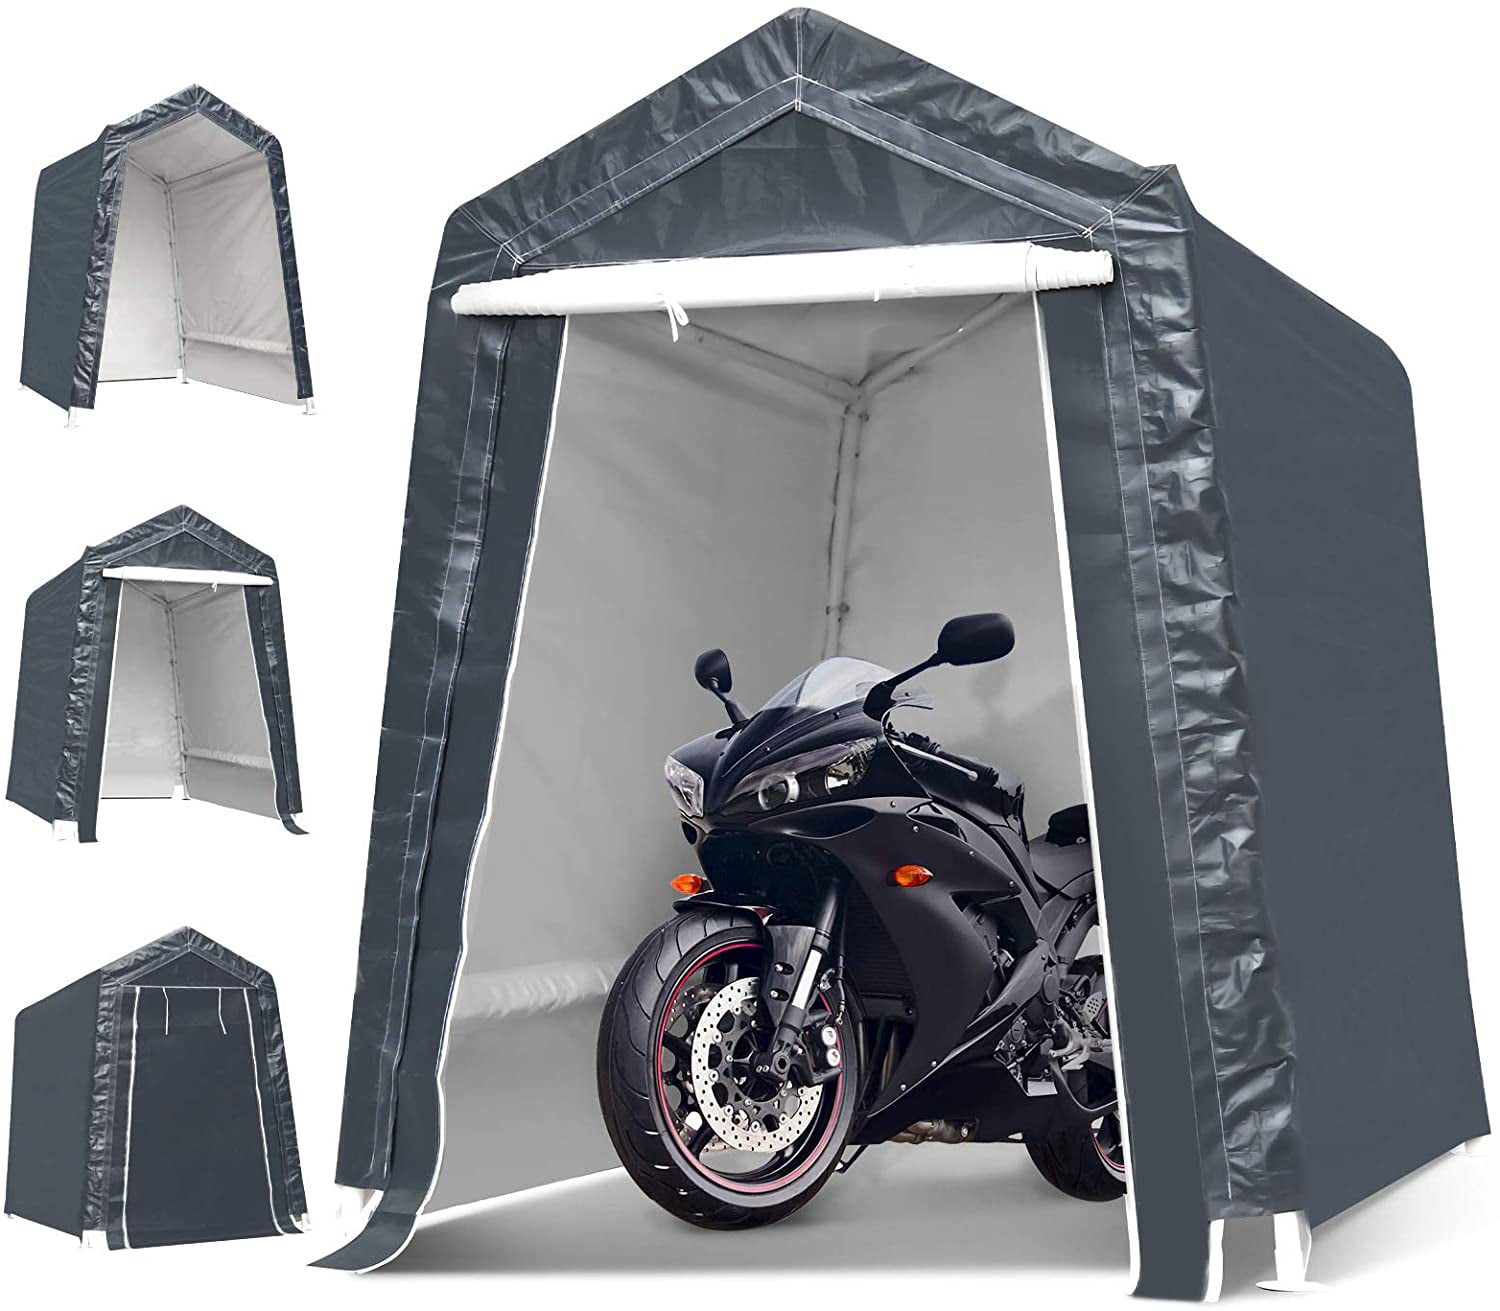 Bike Storage Sheds 6x8x7ft Carport Canopy Motorcycle Tent Portable